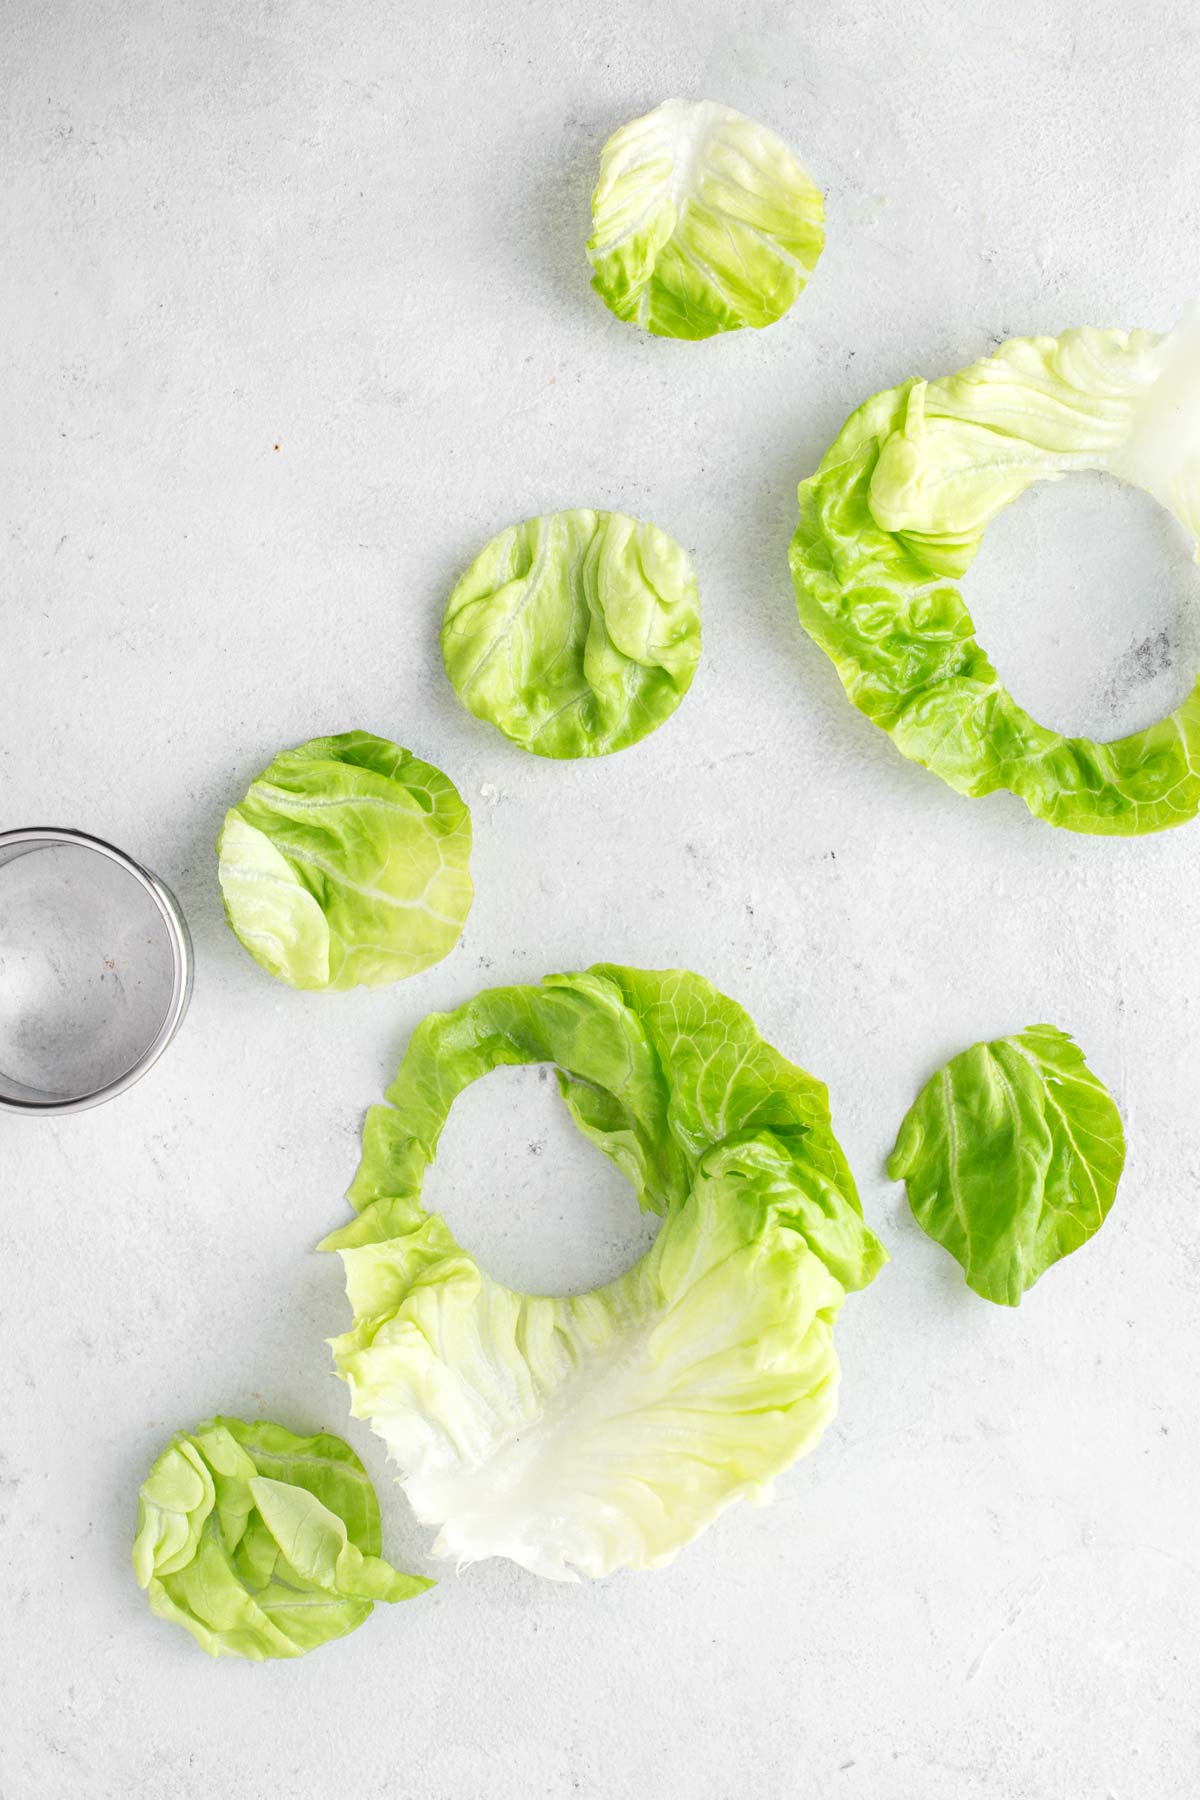 Butter lettuce being cut into circles with a round cookie cutter.